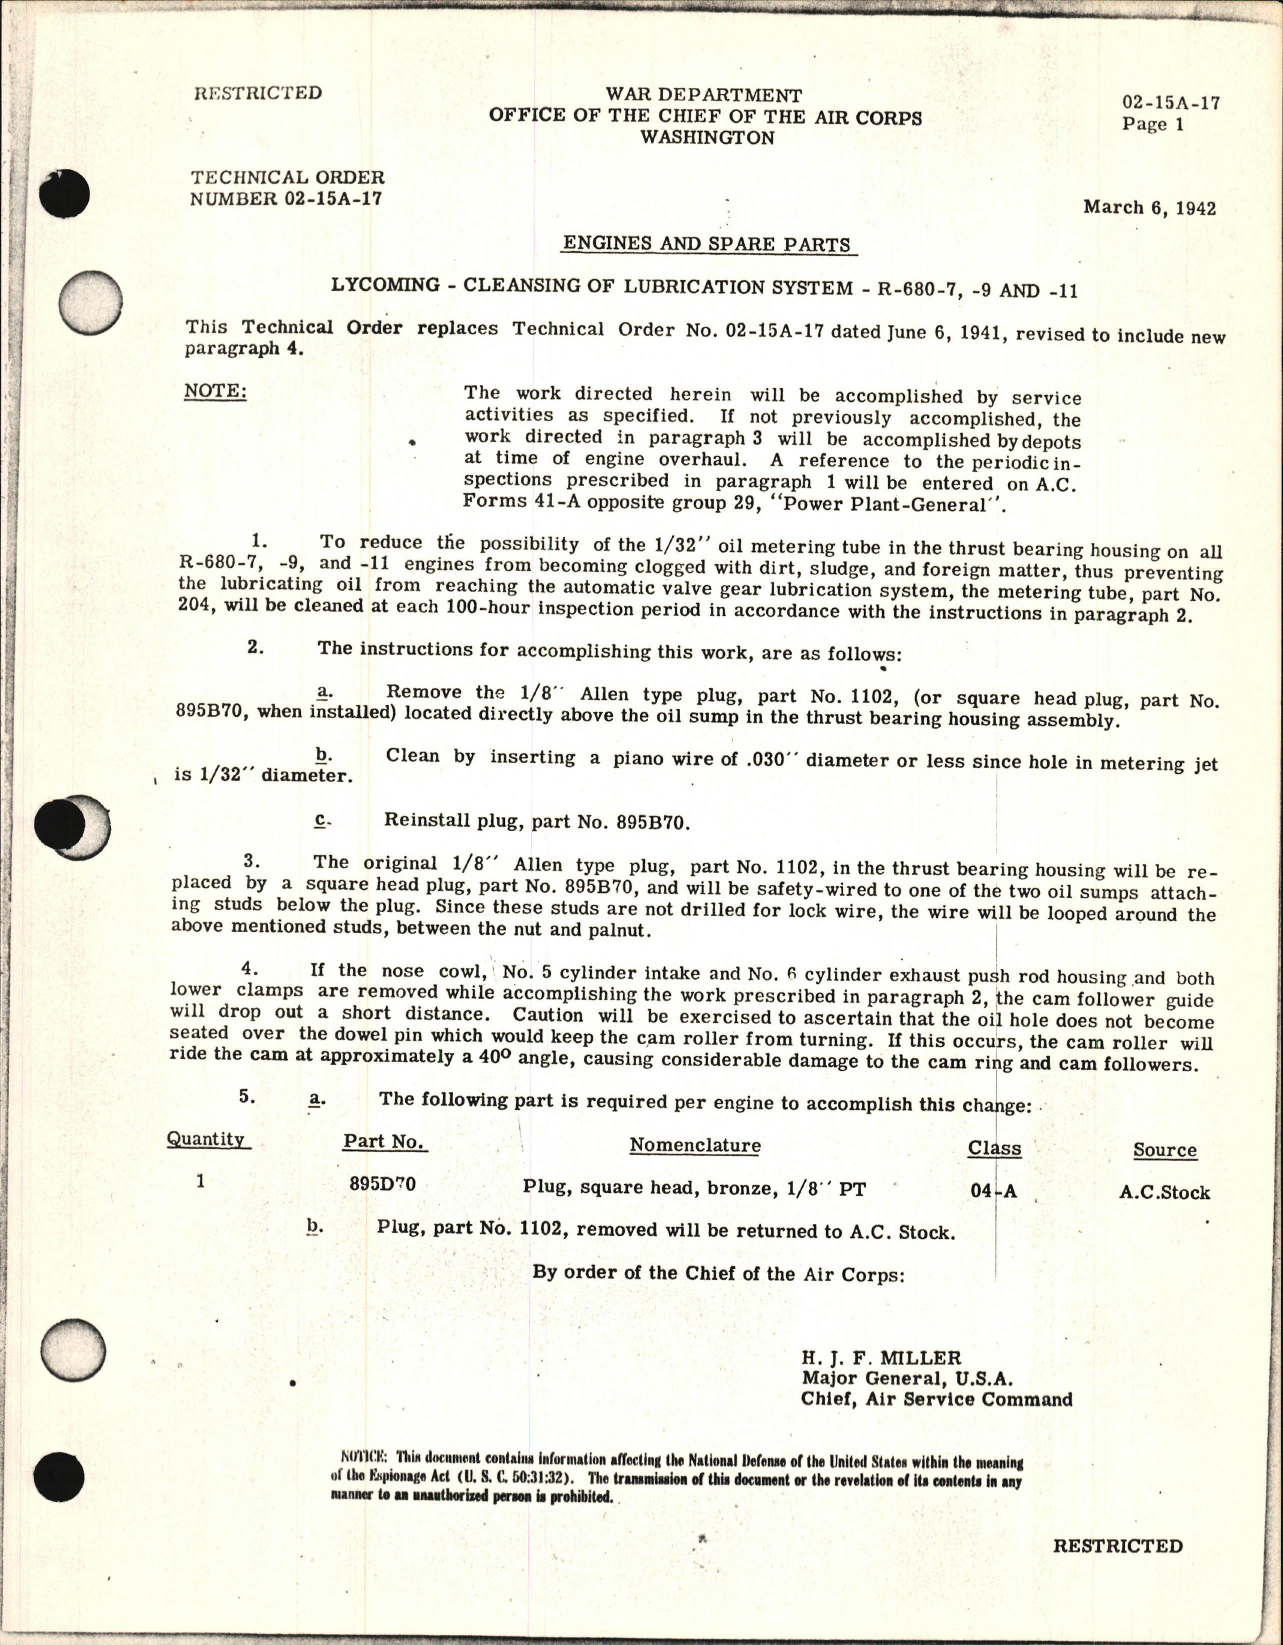 Sample page 1 from AirCorps Library document: Cleansing of Lubrication System for R-680-7, -9, and -11